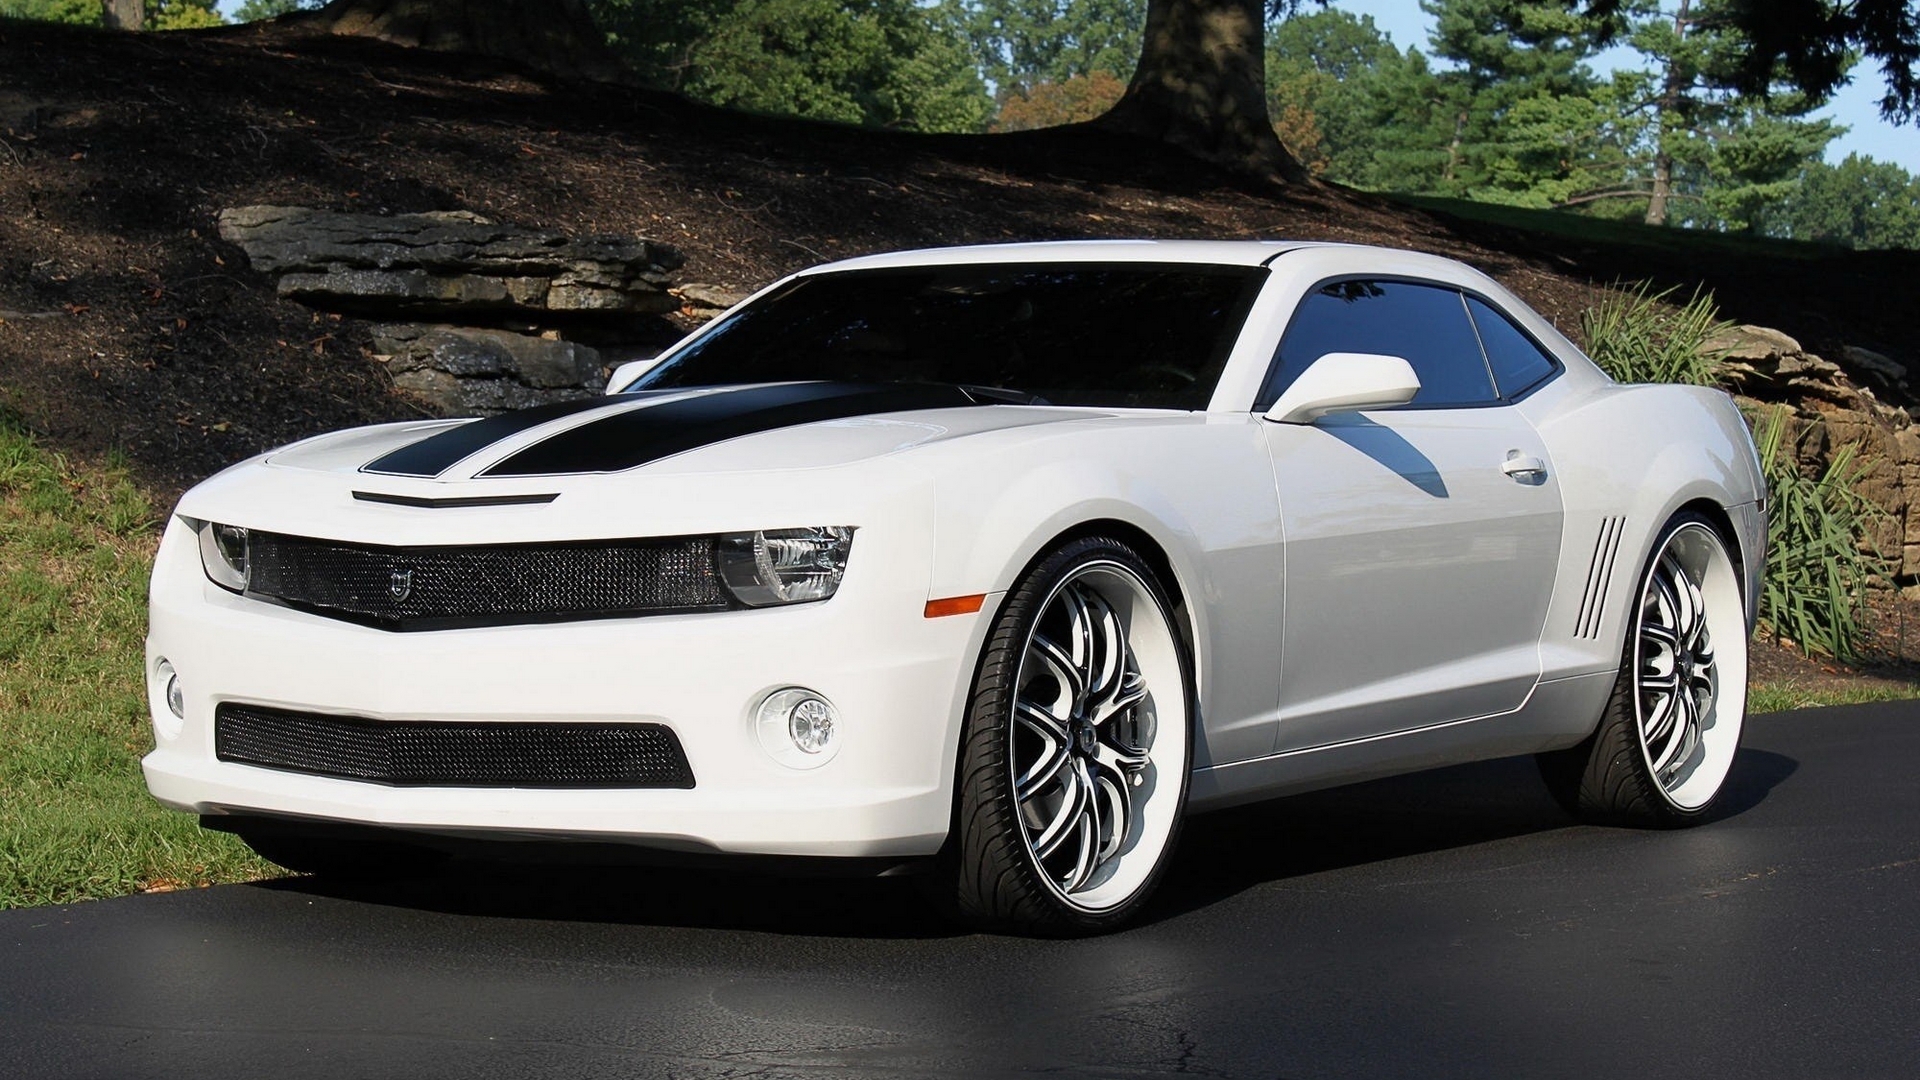 General 1920x1080 car white cars vehicle Chevrolet Chevrolet Camaro muscle cars American cars